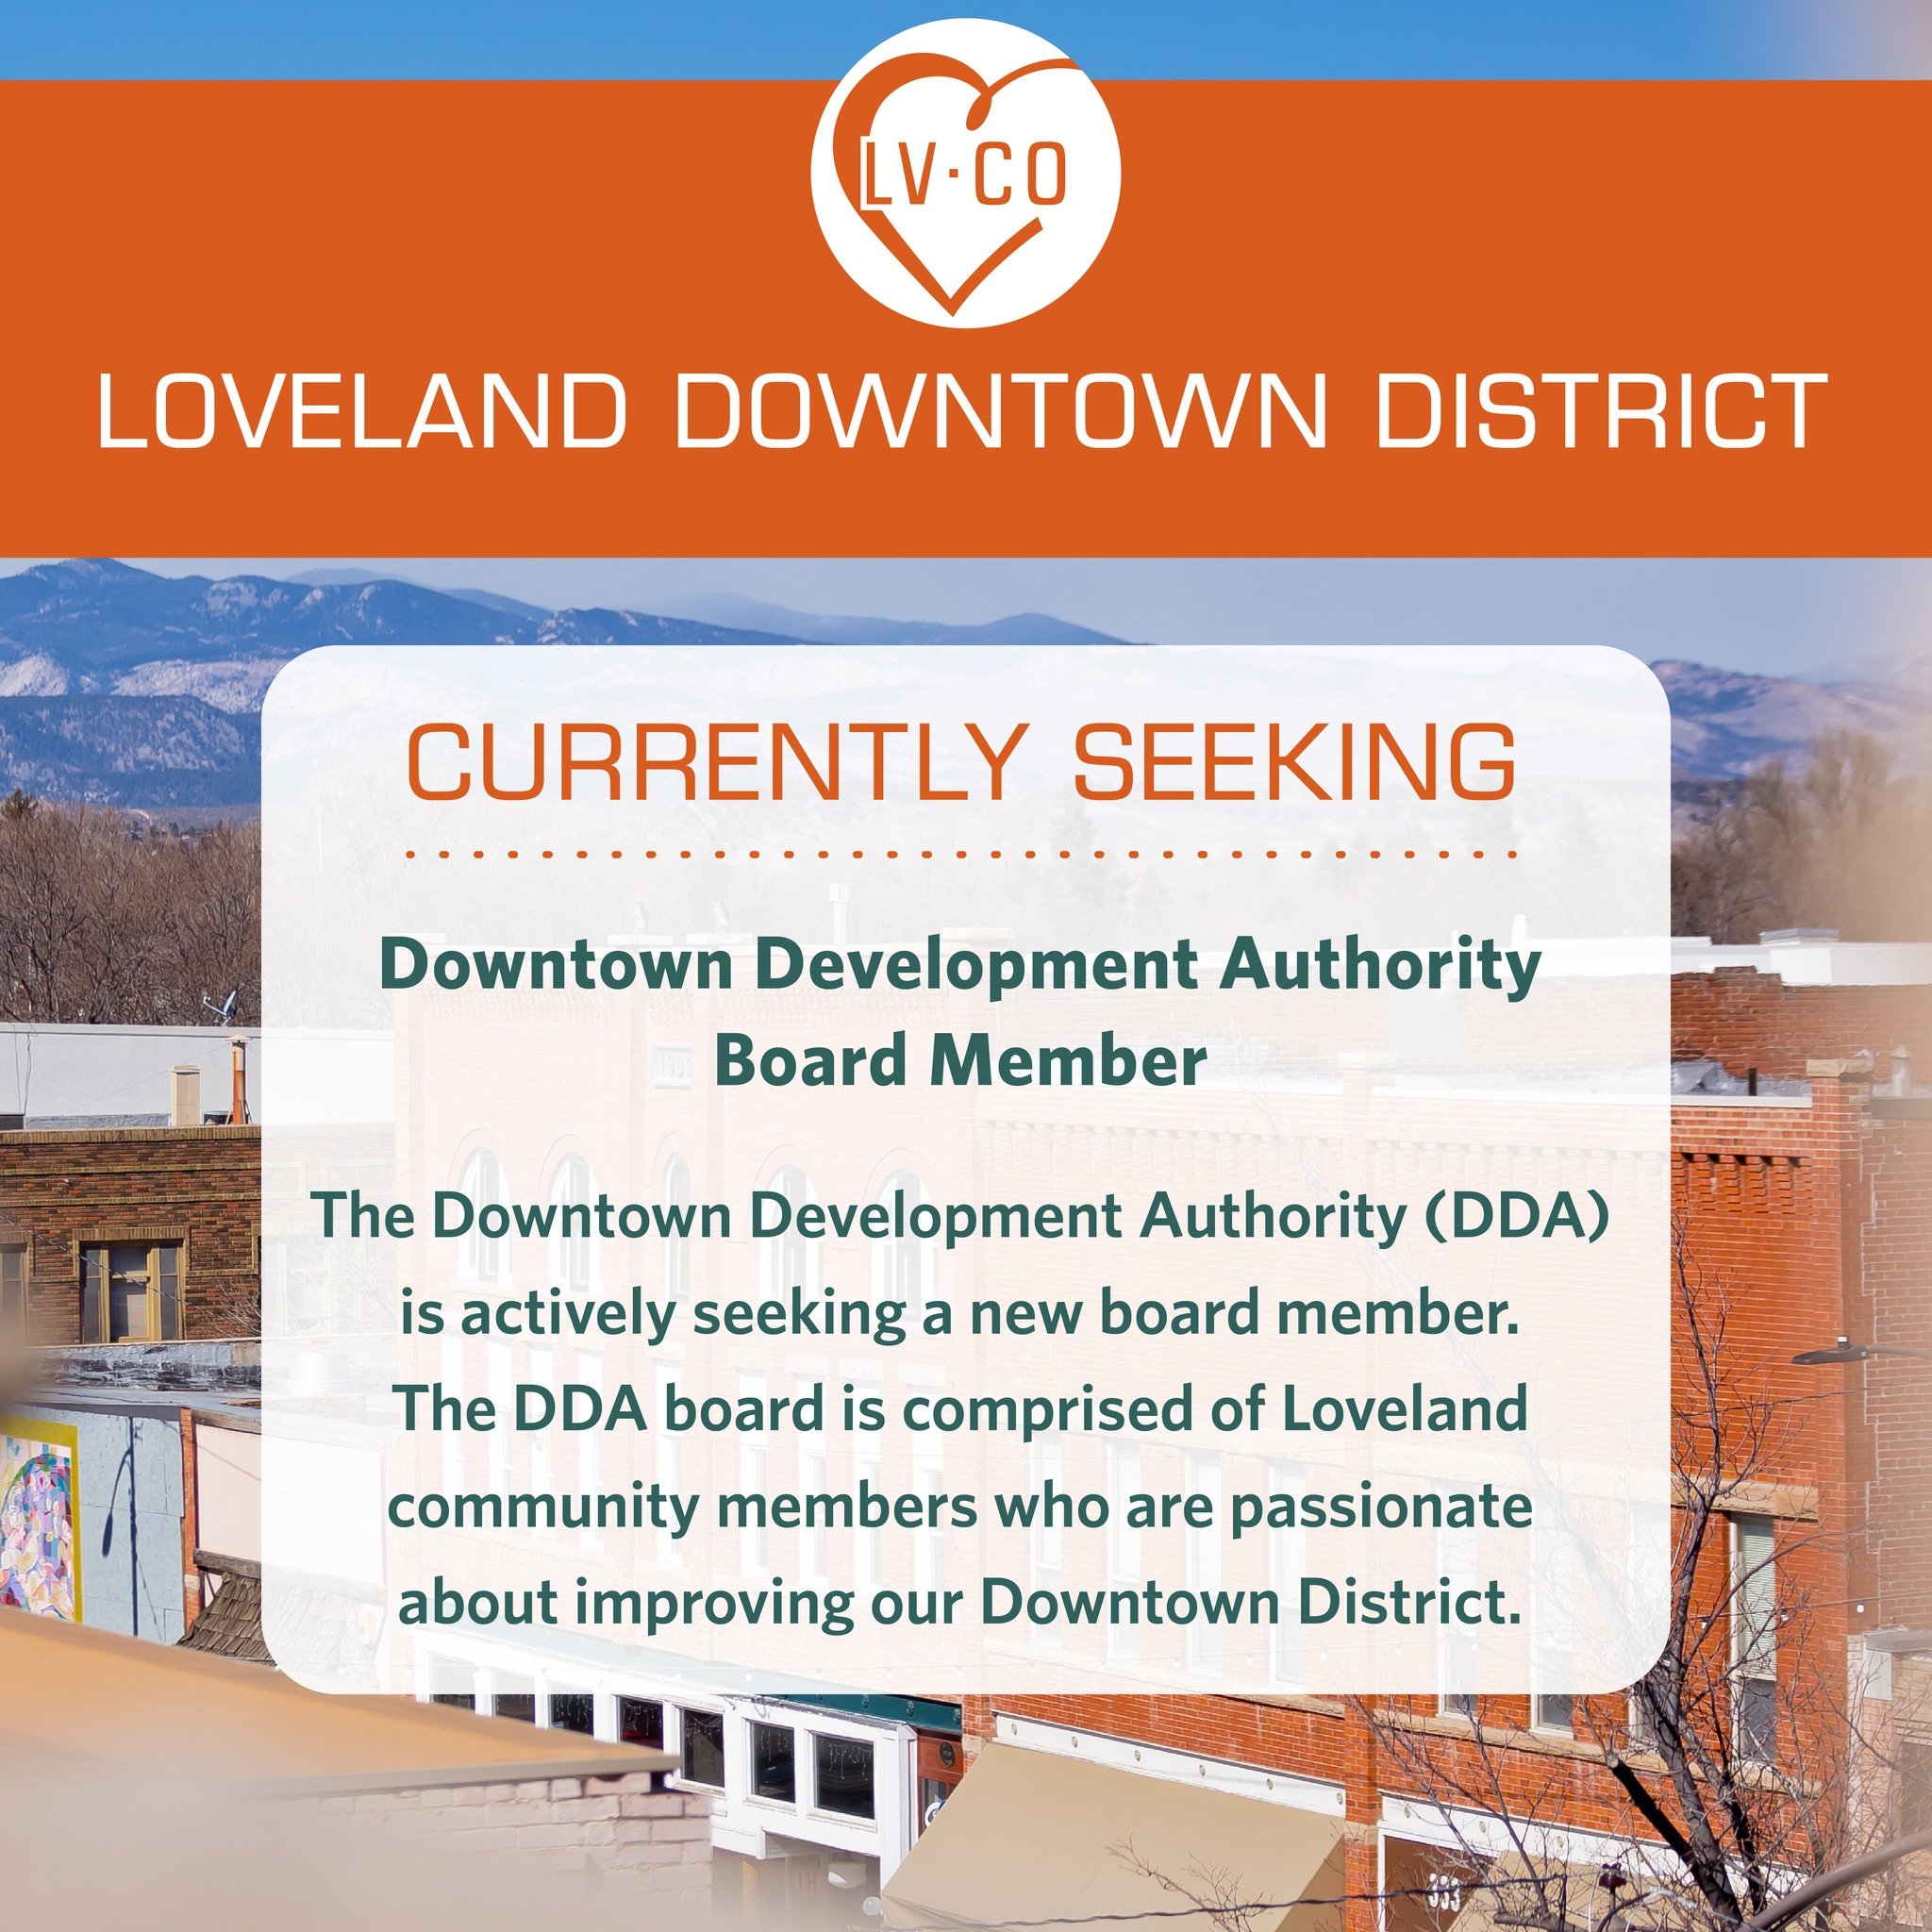 CURRENTLY SEEKING: Downtown Development Authority Board Member
Application deadline: May 15th, 2024

APPLICANT REQUIREMENTS:
Must be a resident in the DDA boundary or:
Own a property in the DDA boundary or:
Lease a property in the DDA boundary or:
Ma